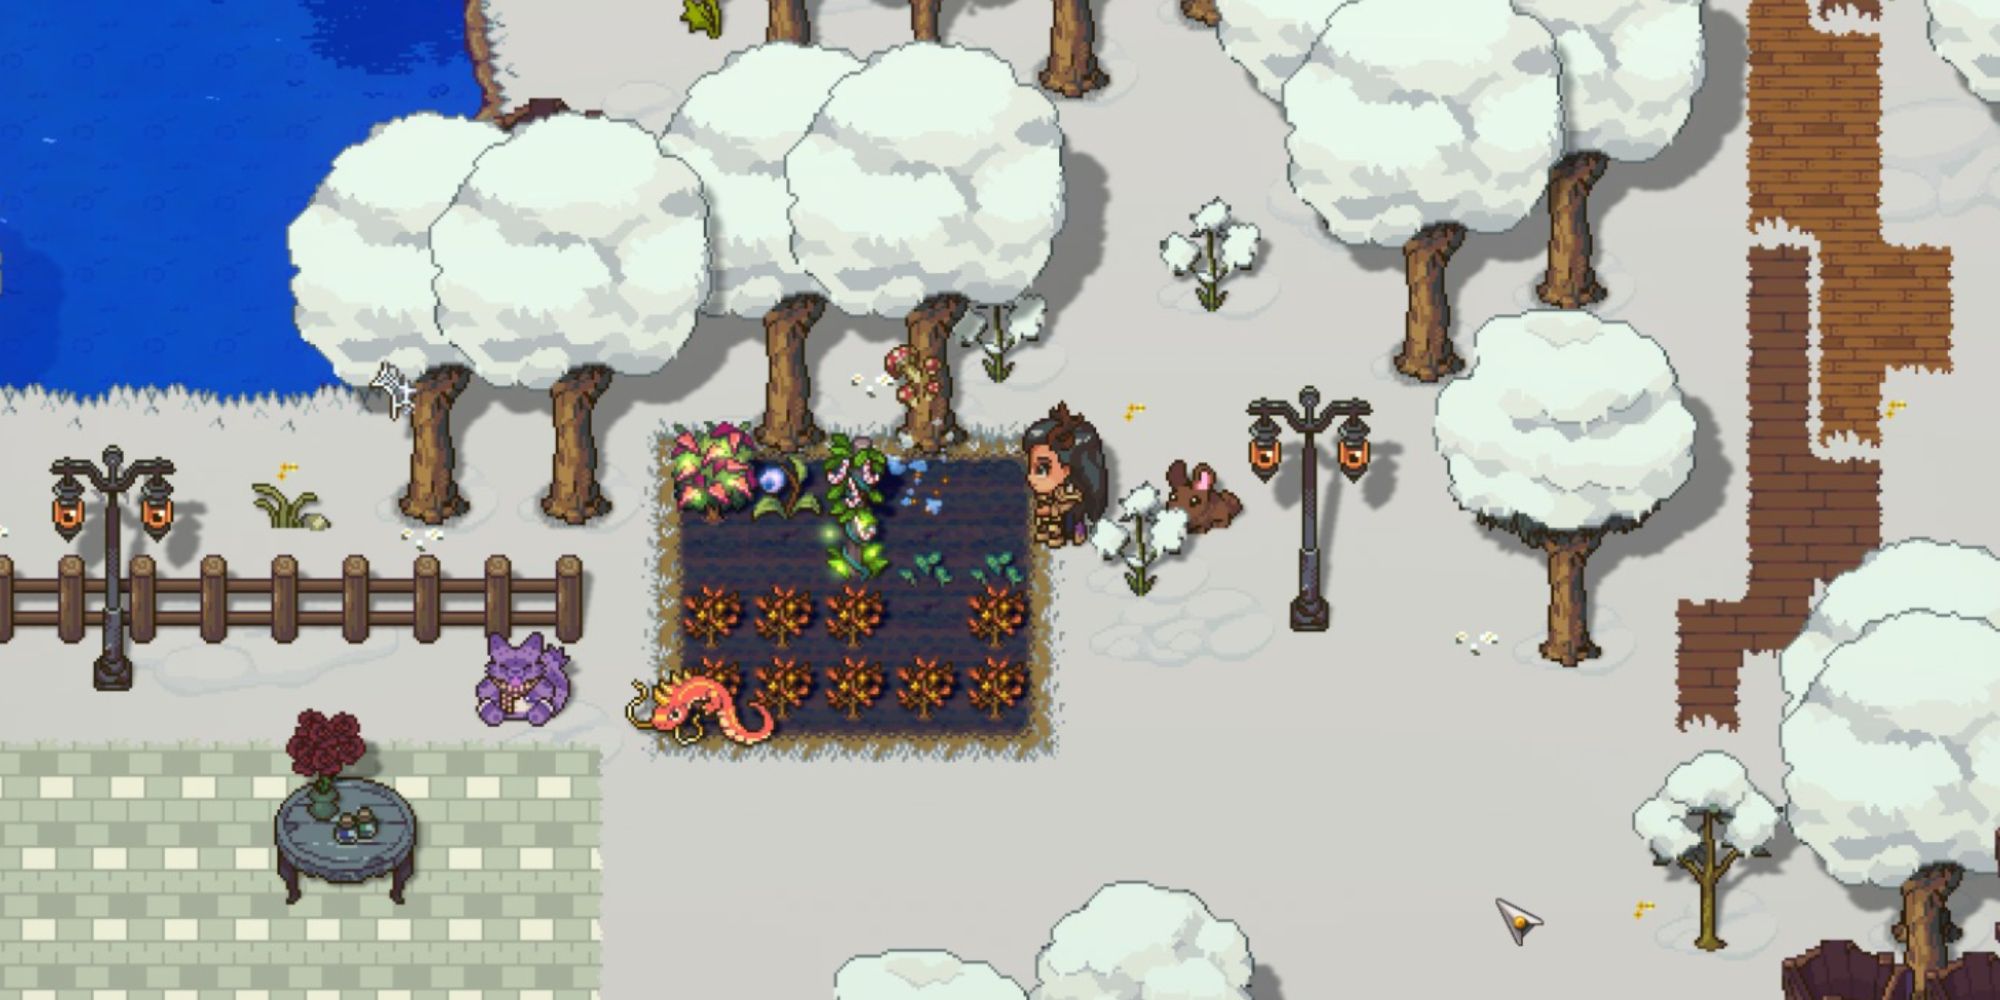 sun haven player planting crops in winter